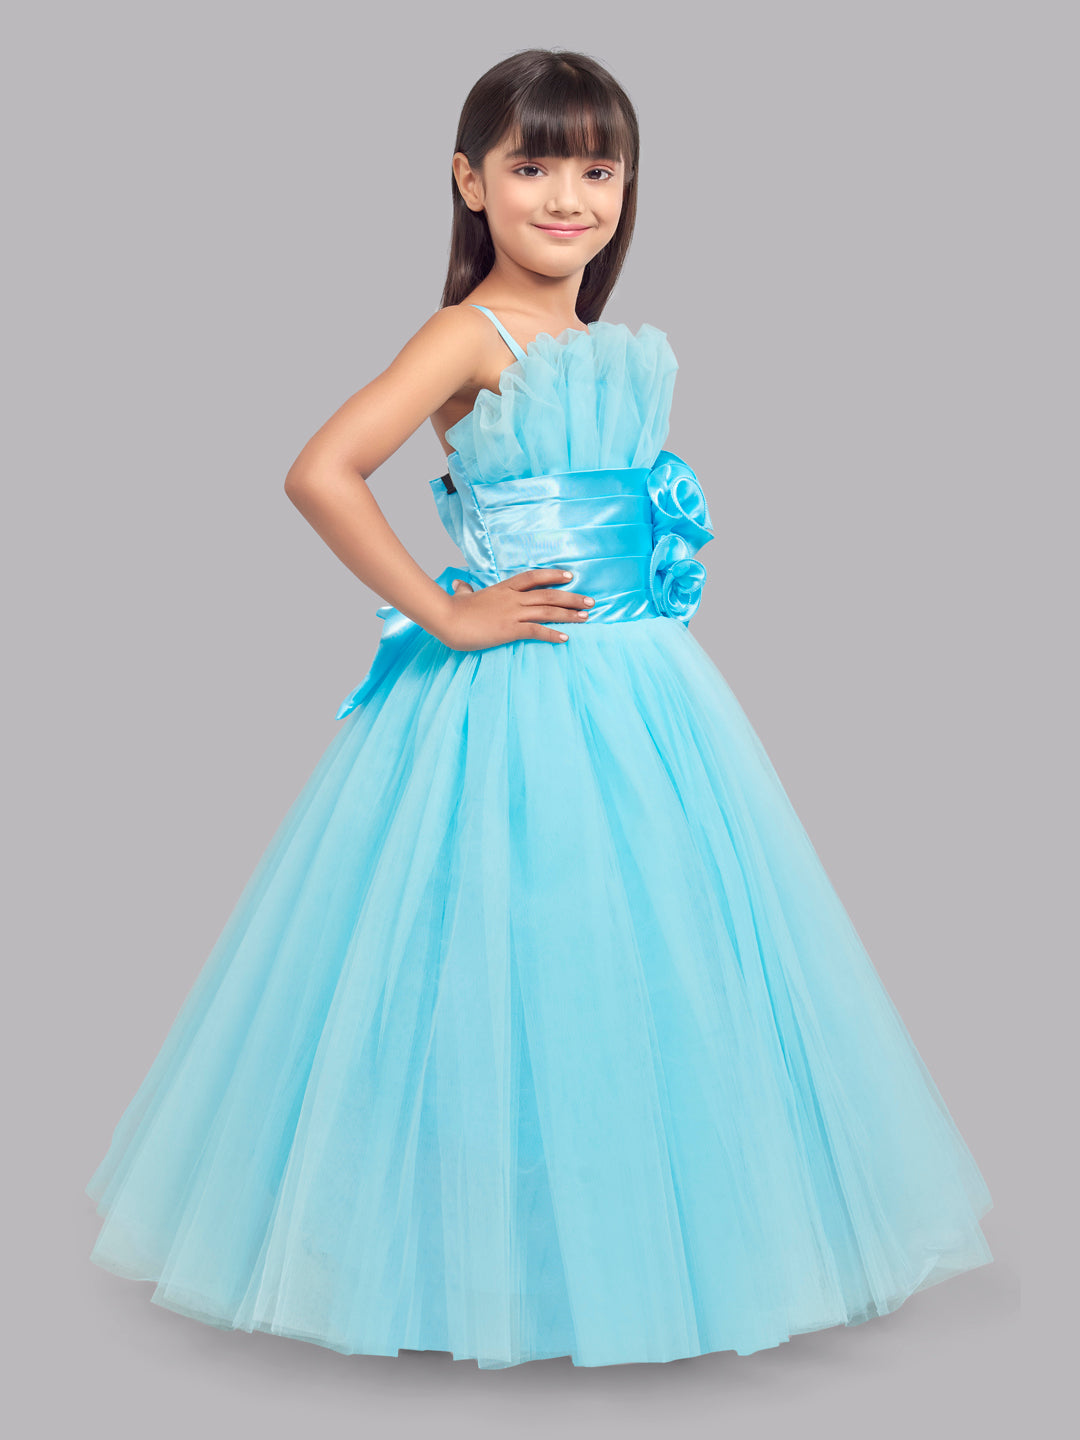 Copy of Ruffled Silhouette Party Gown - blue